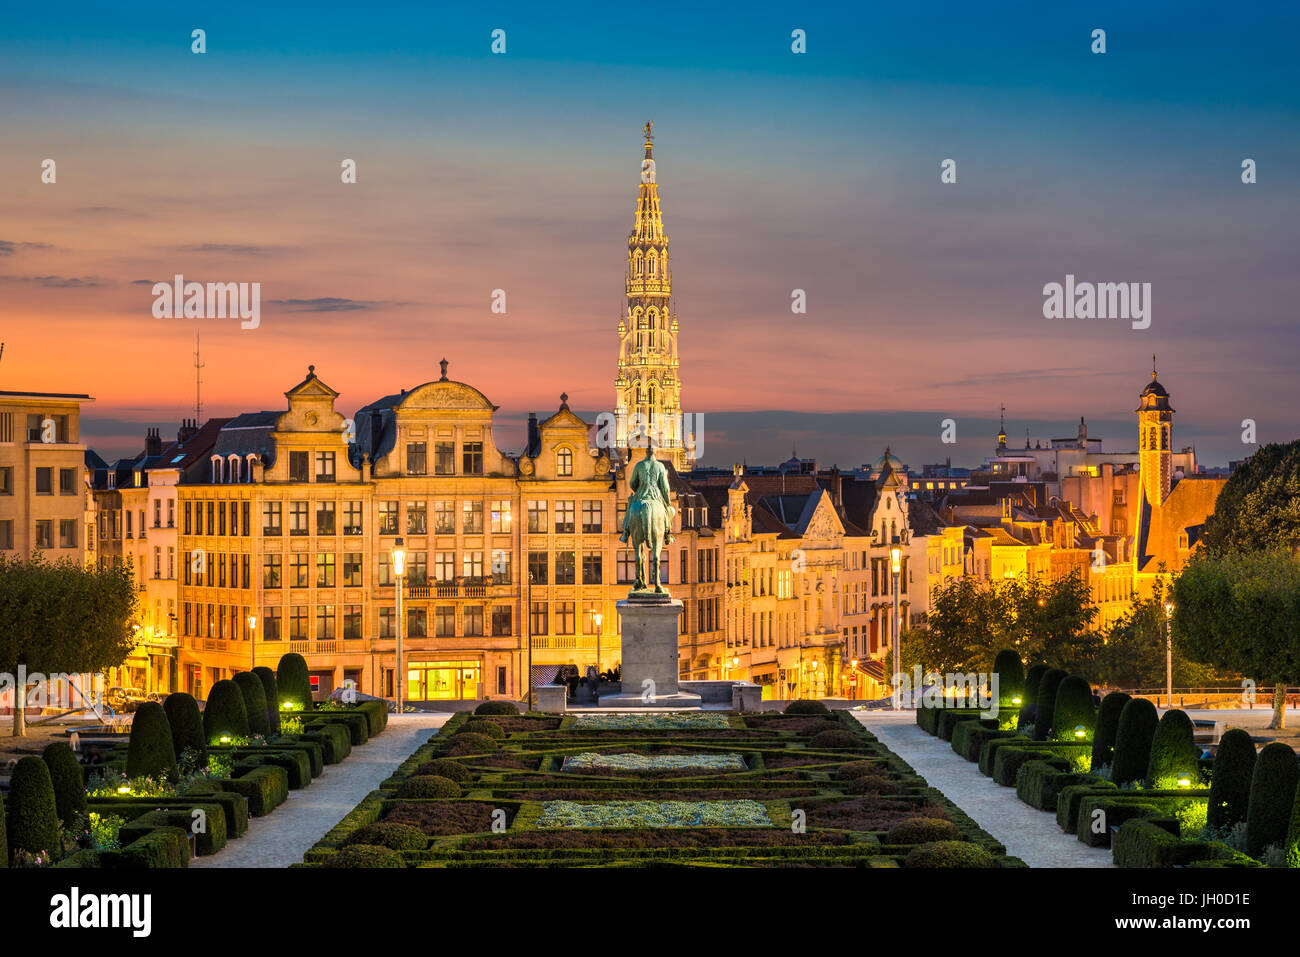 Skyline of the old city of Brussels, Belgium during sunset Stock Photo